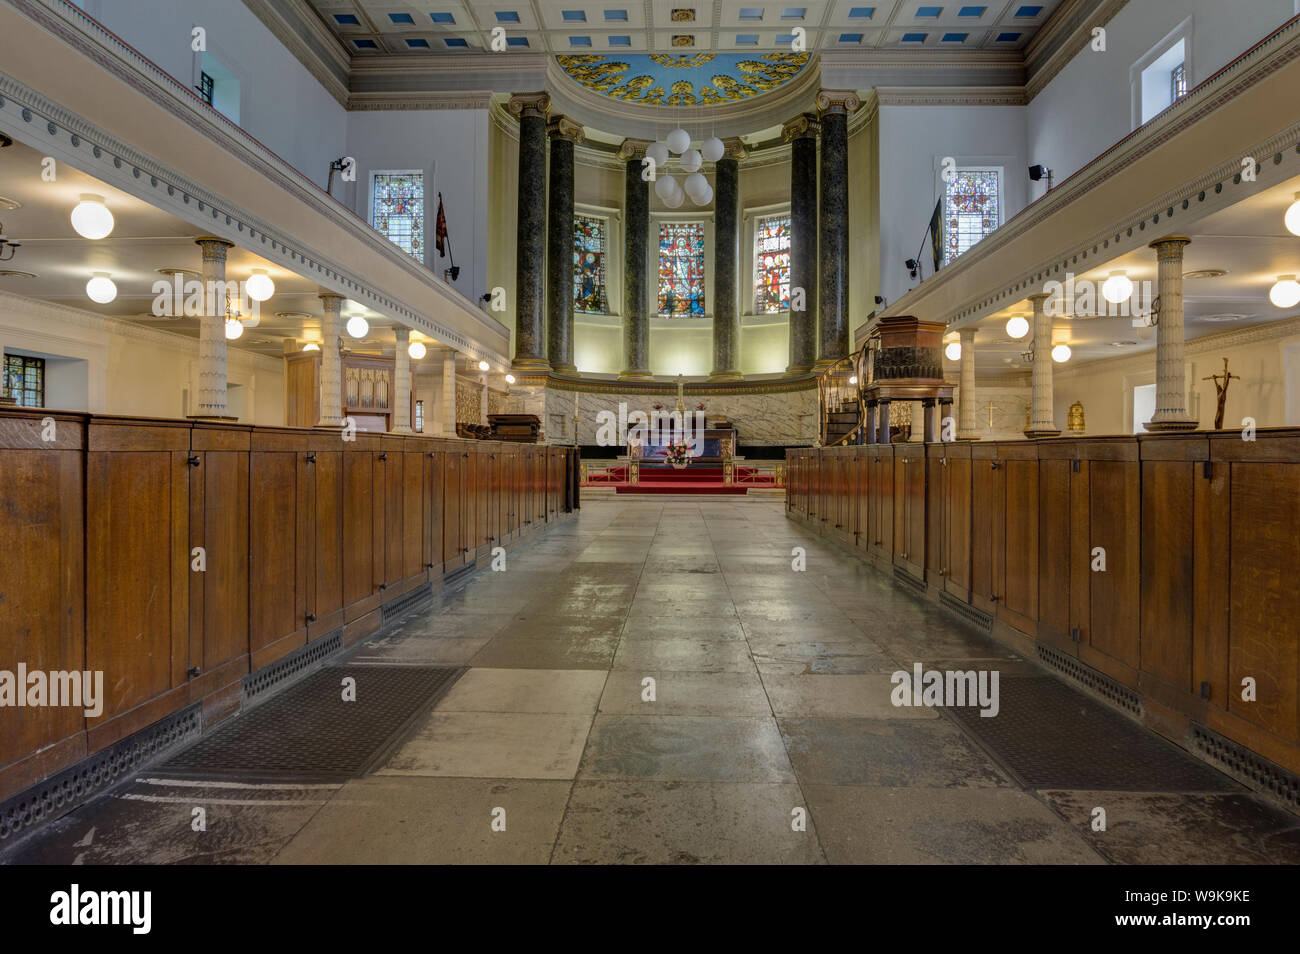 The interior of the parish church of St Pancras, London, UK; built in the Greek Revival style in 1822. Stock Photo